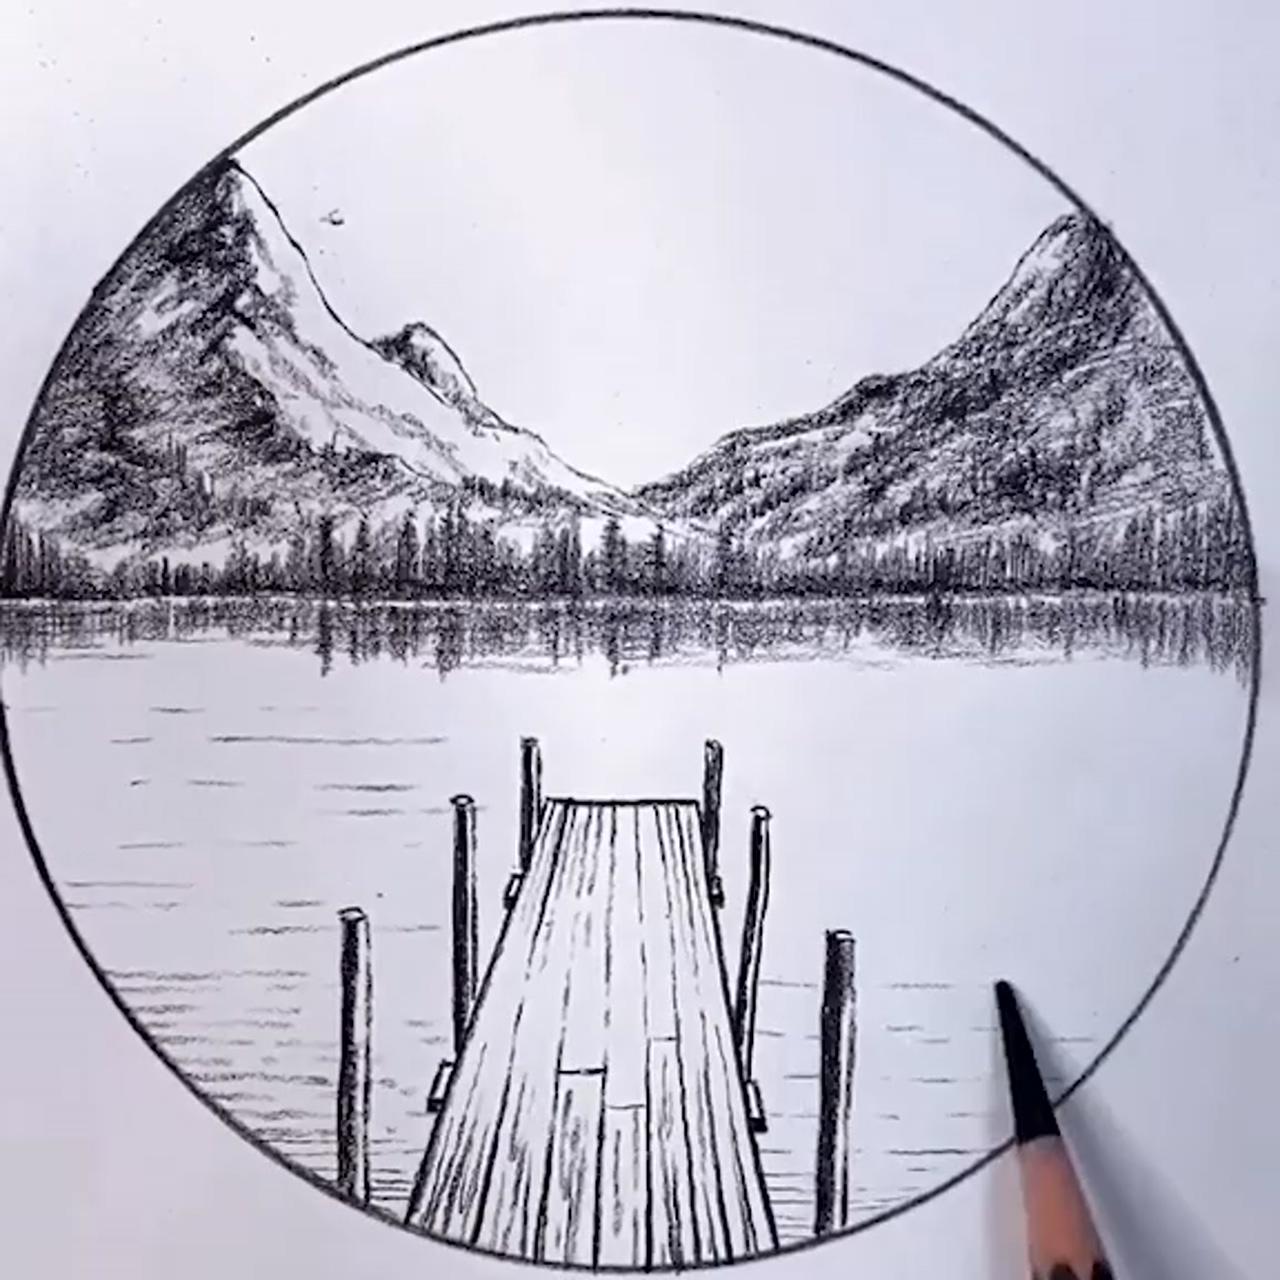 You can draw this too | landscape pencil drawings